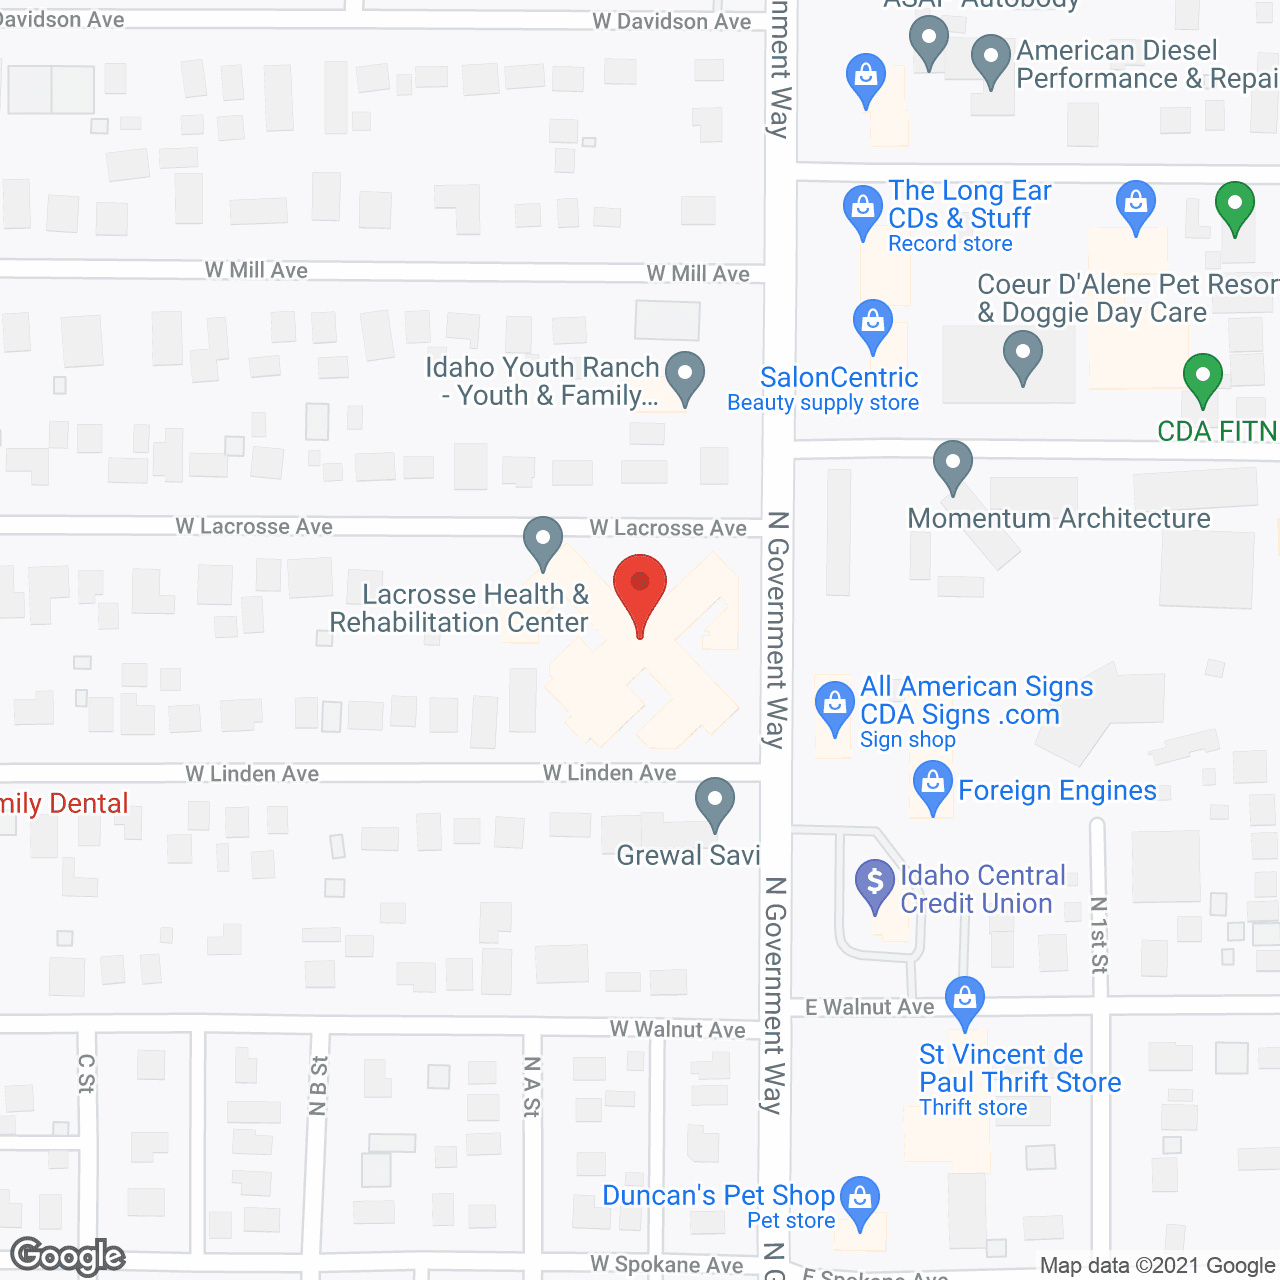 Lacrosse Health and Rehab Center in google map